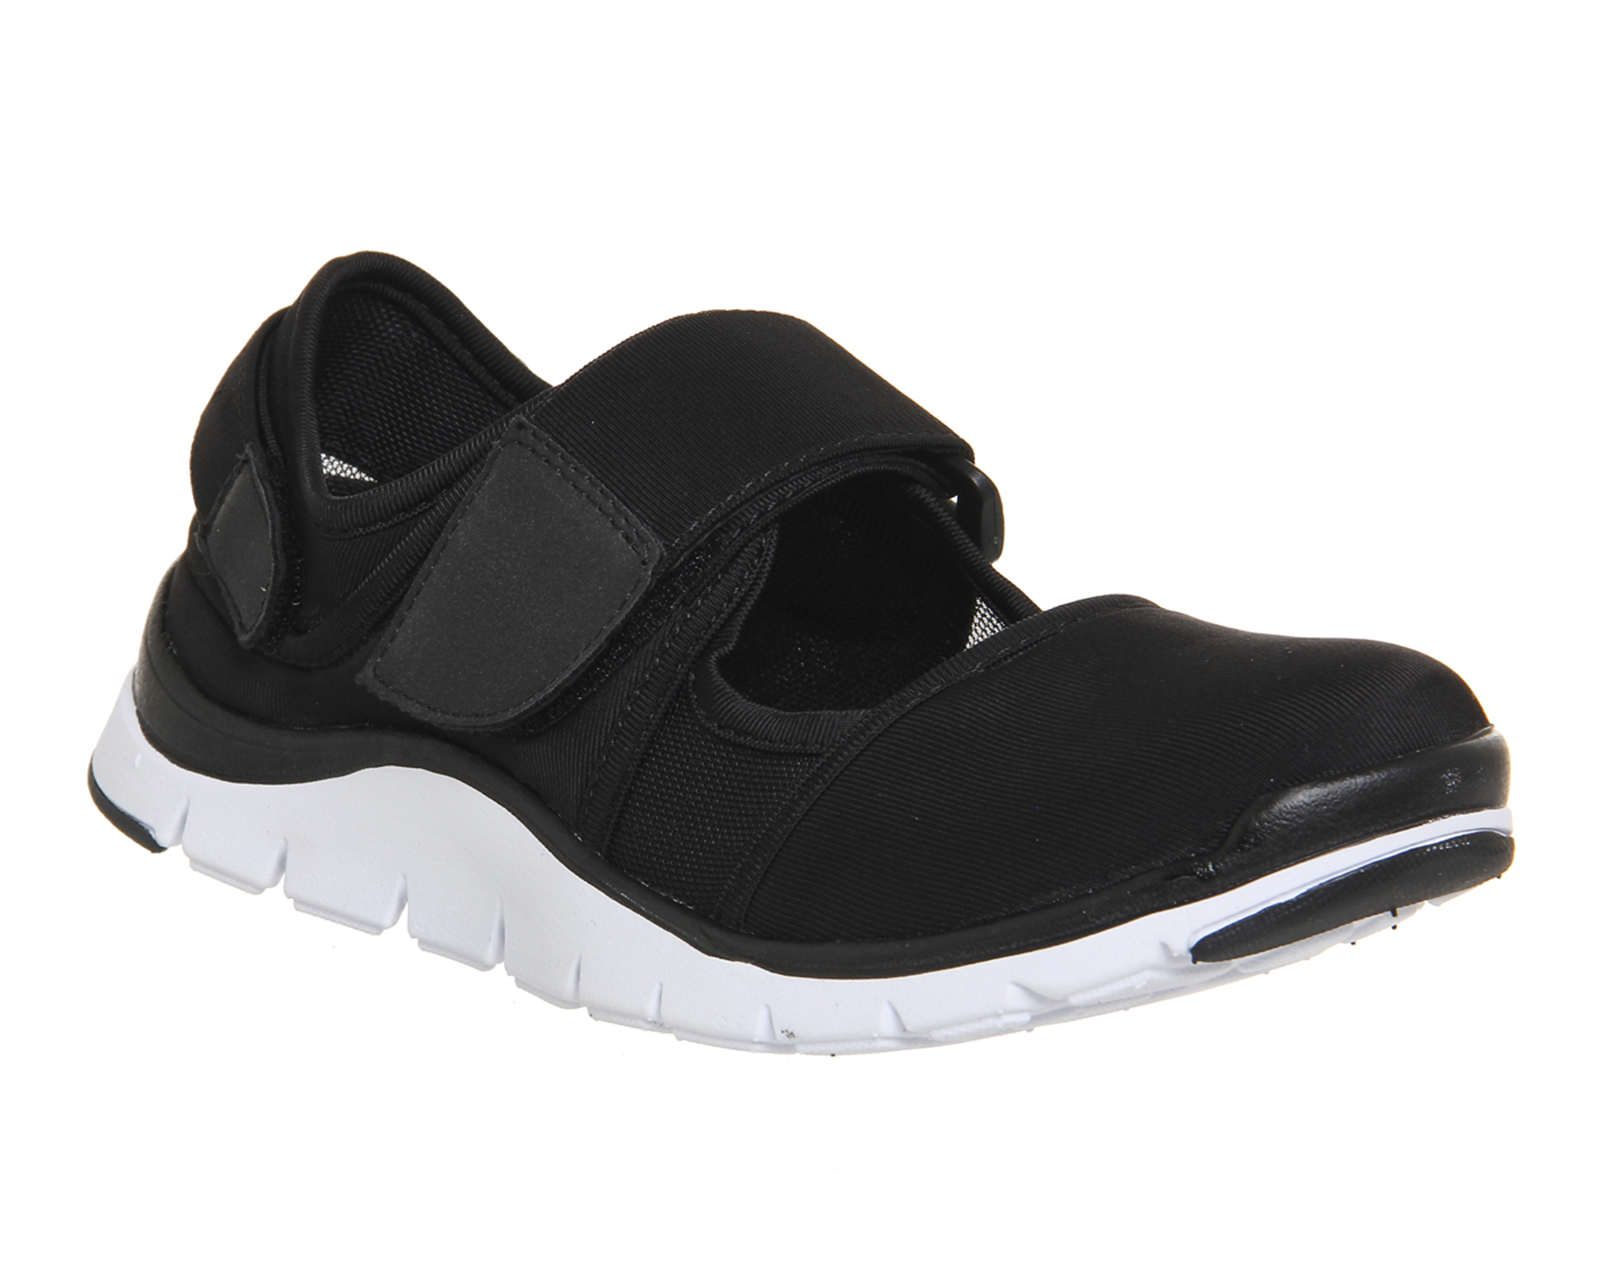 nike trainers with velcro straps